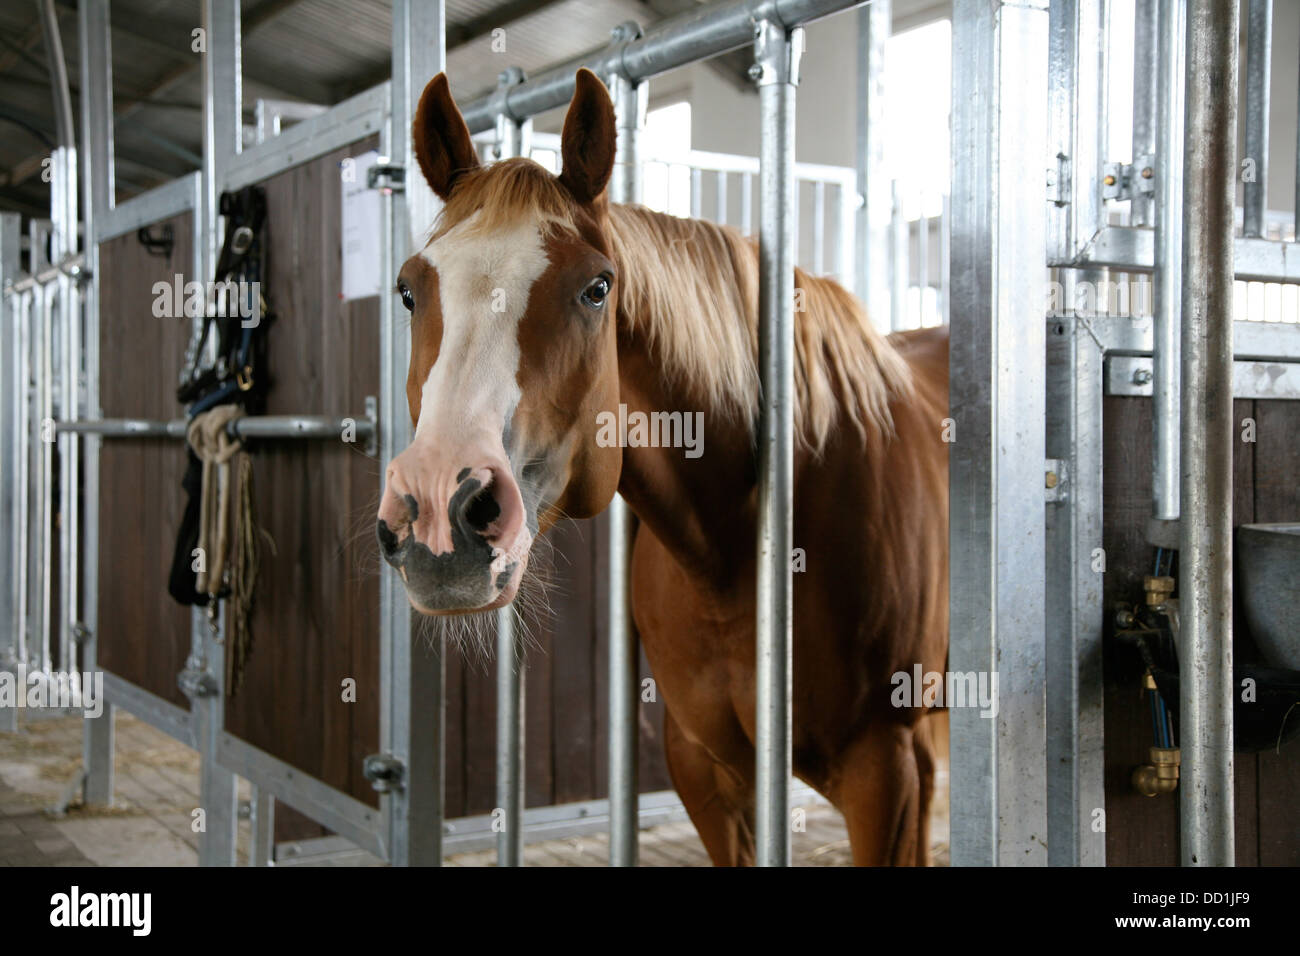 horse in stable Stock Photo